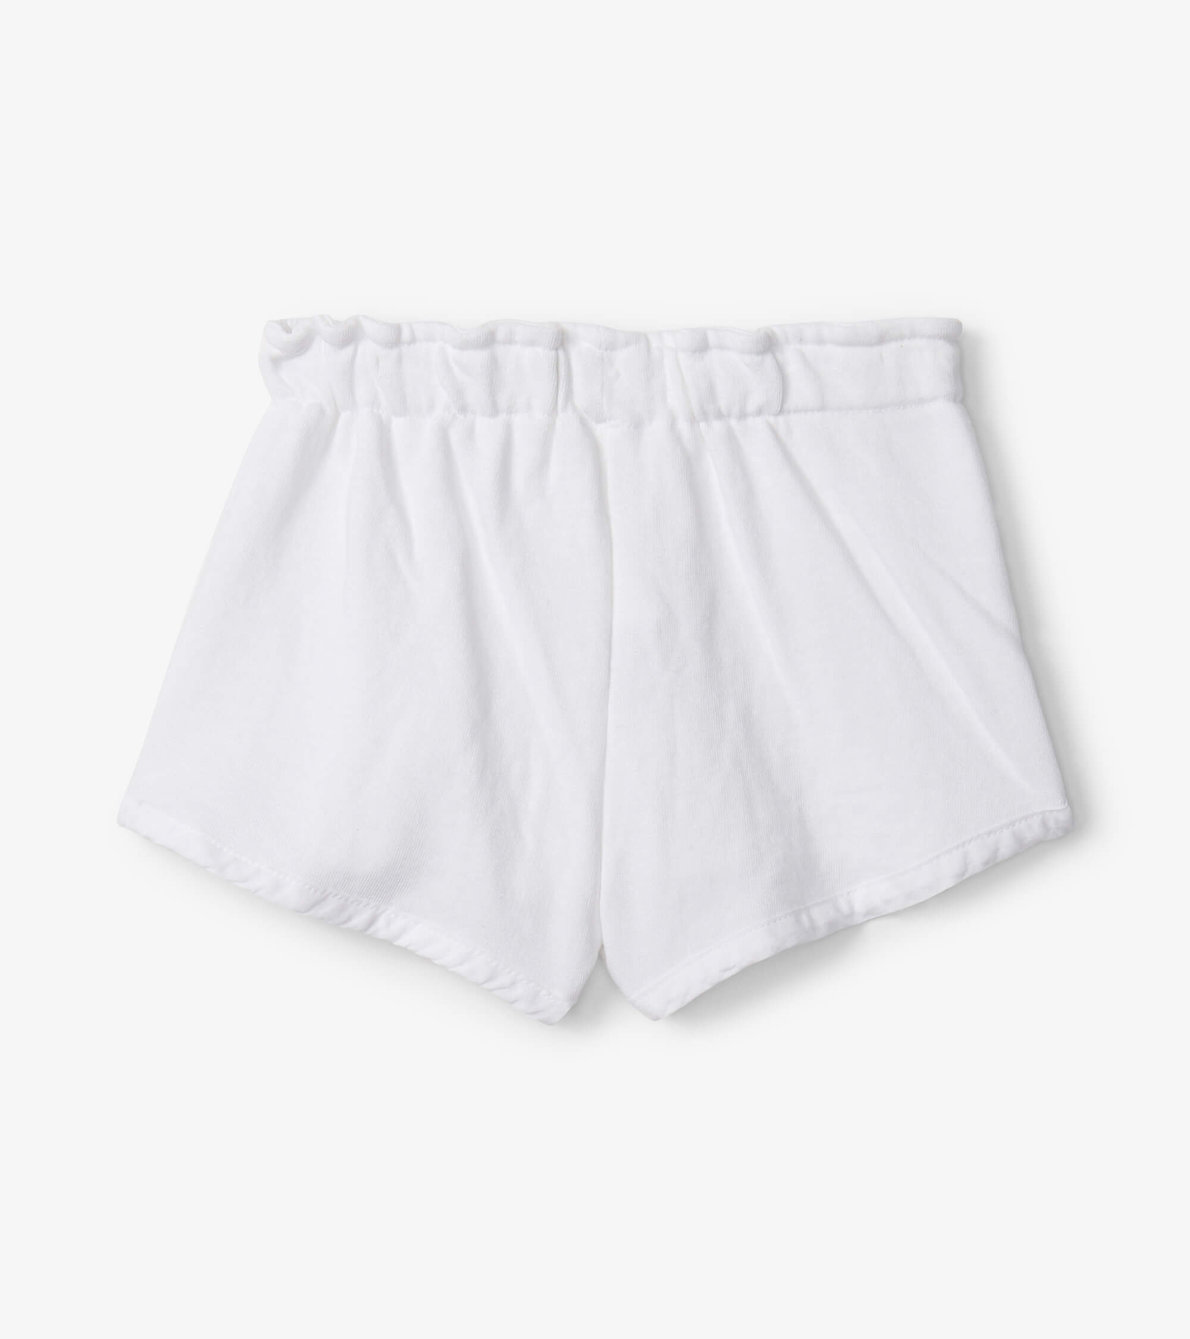 View larger image of White Adventure Shorts